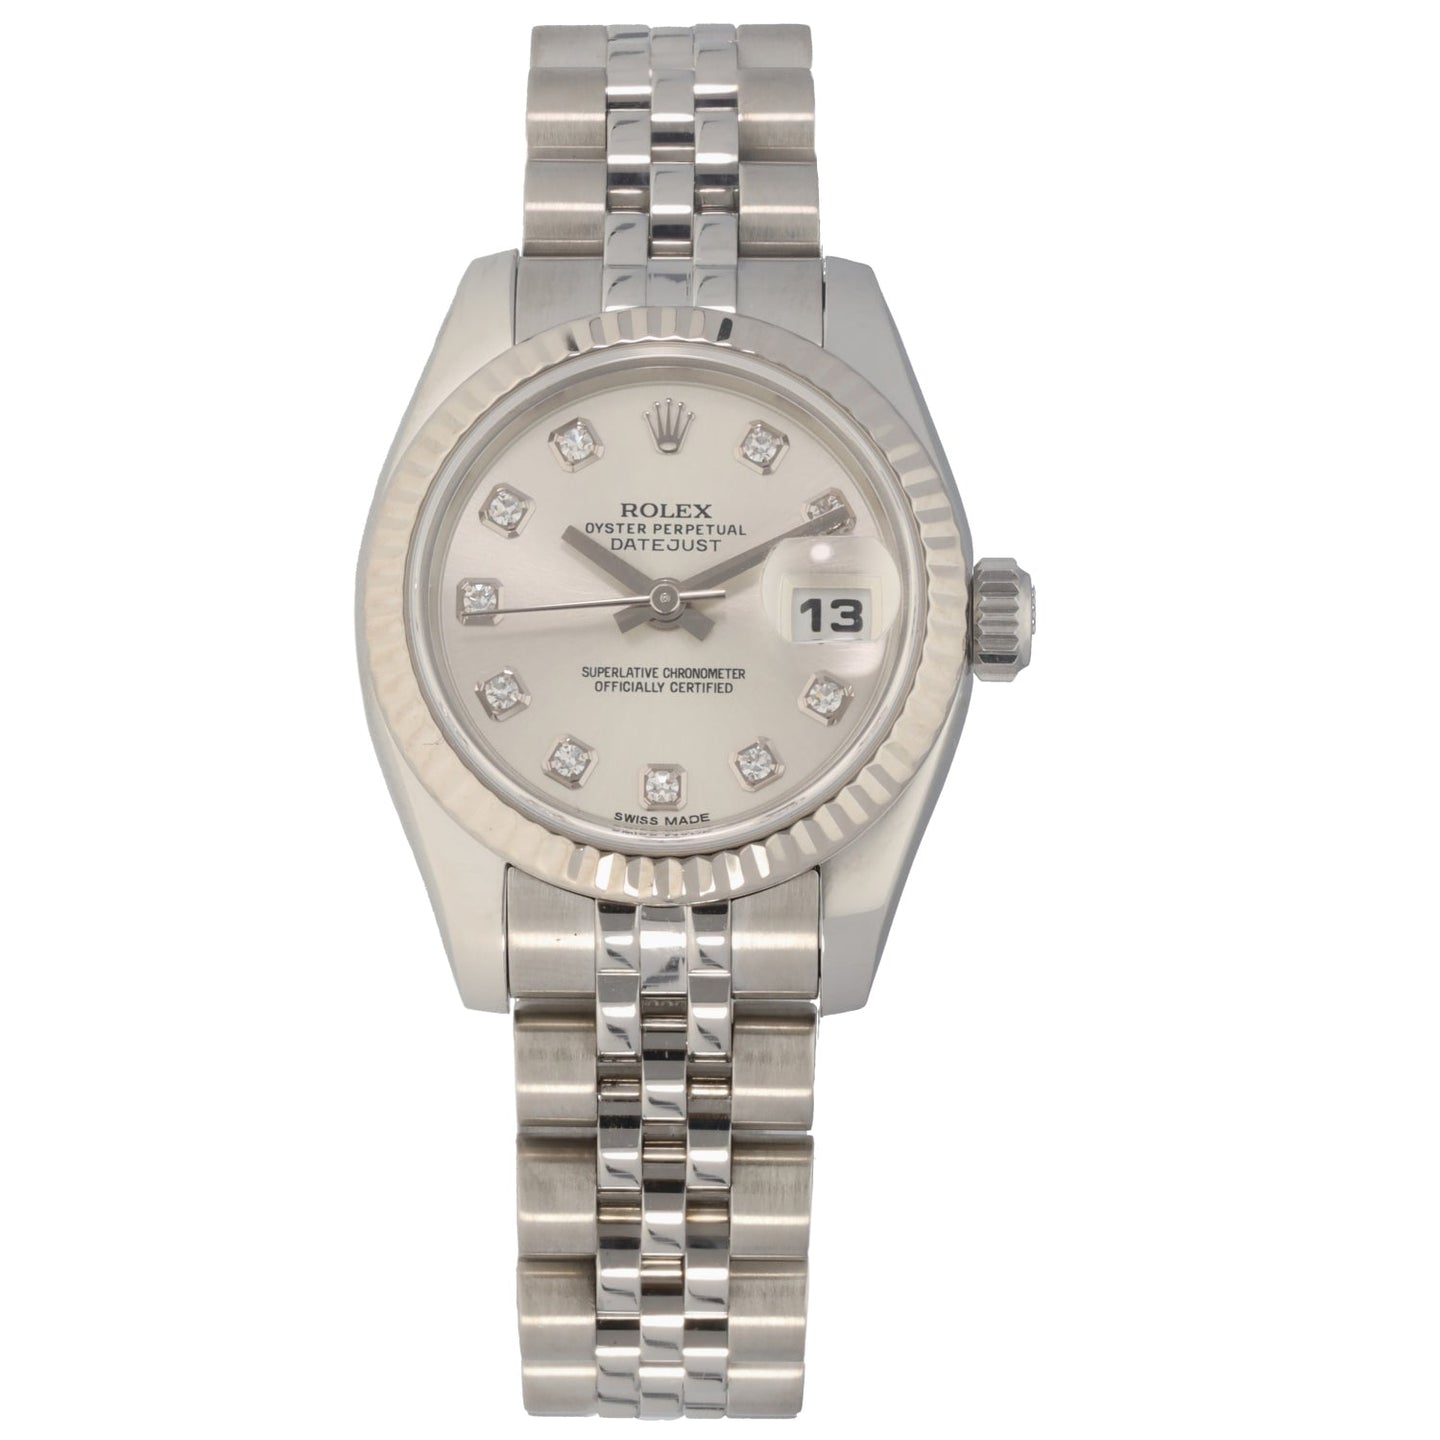 Rolex Lady Datejust 179174 26mm Stainless Steel Watch